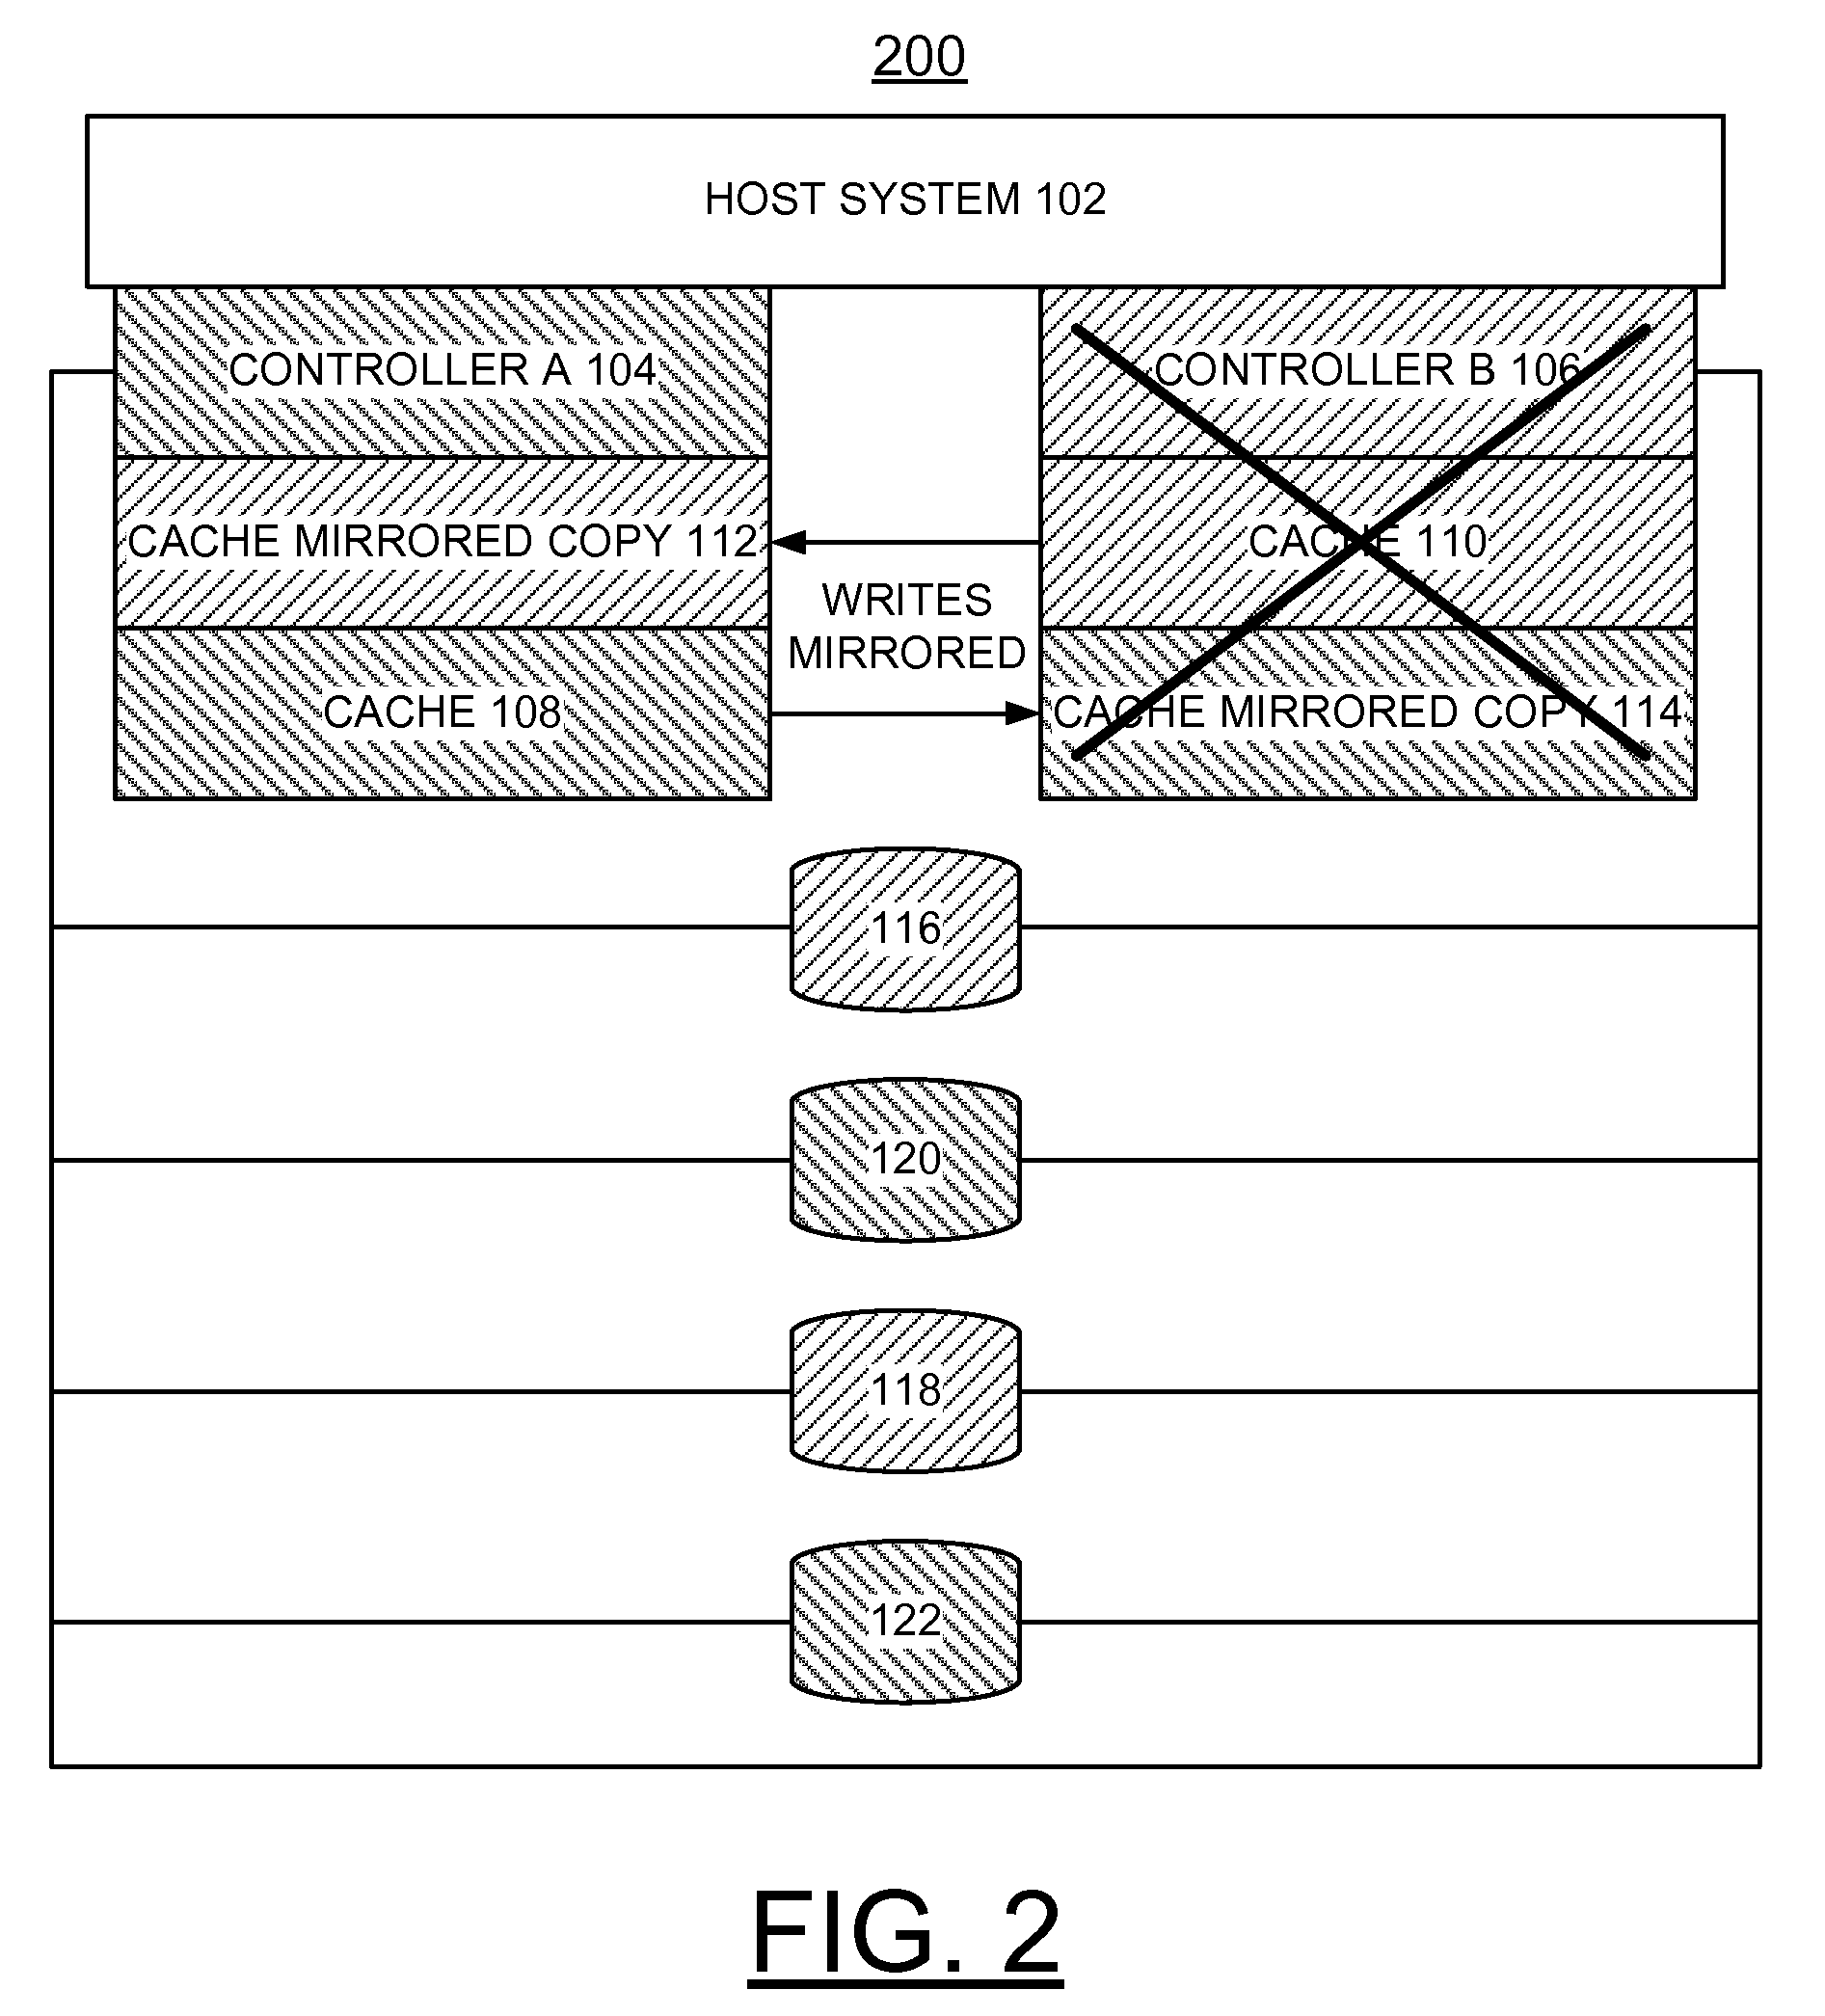 Implementing enhanced data caching and takeover of non-owned storage devices in dual storage device controller configuration with data in write cache